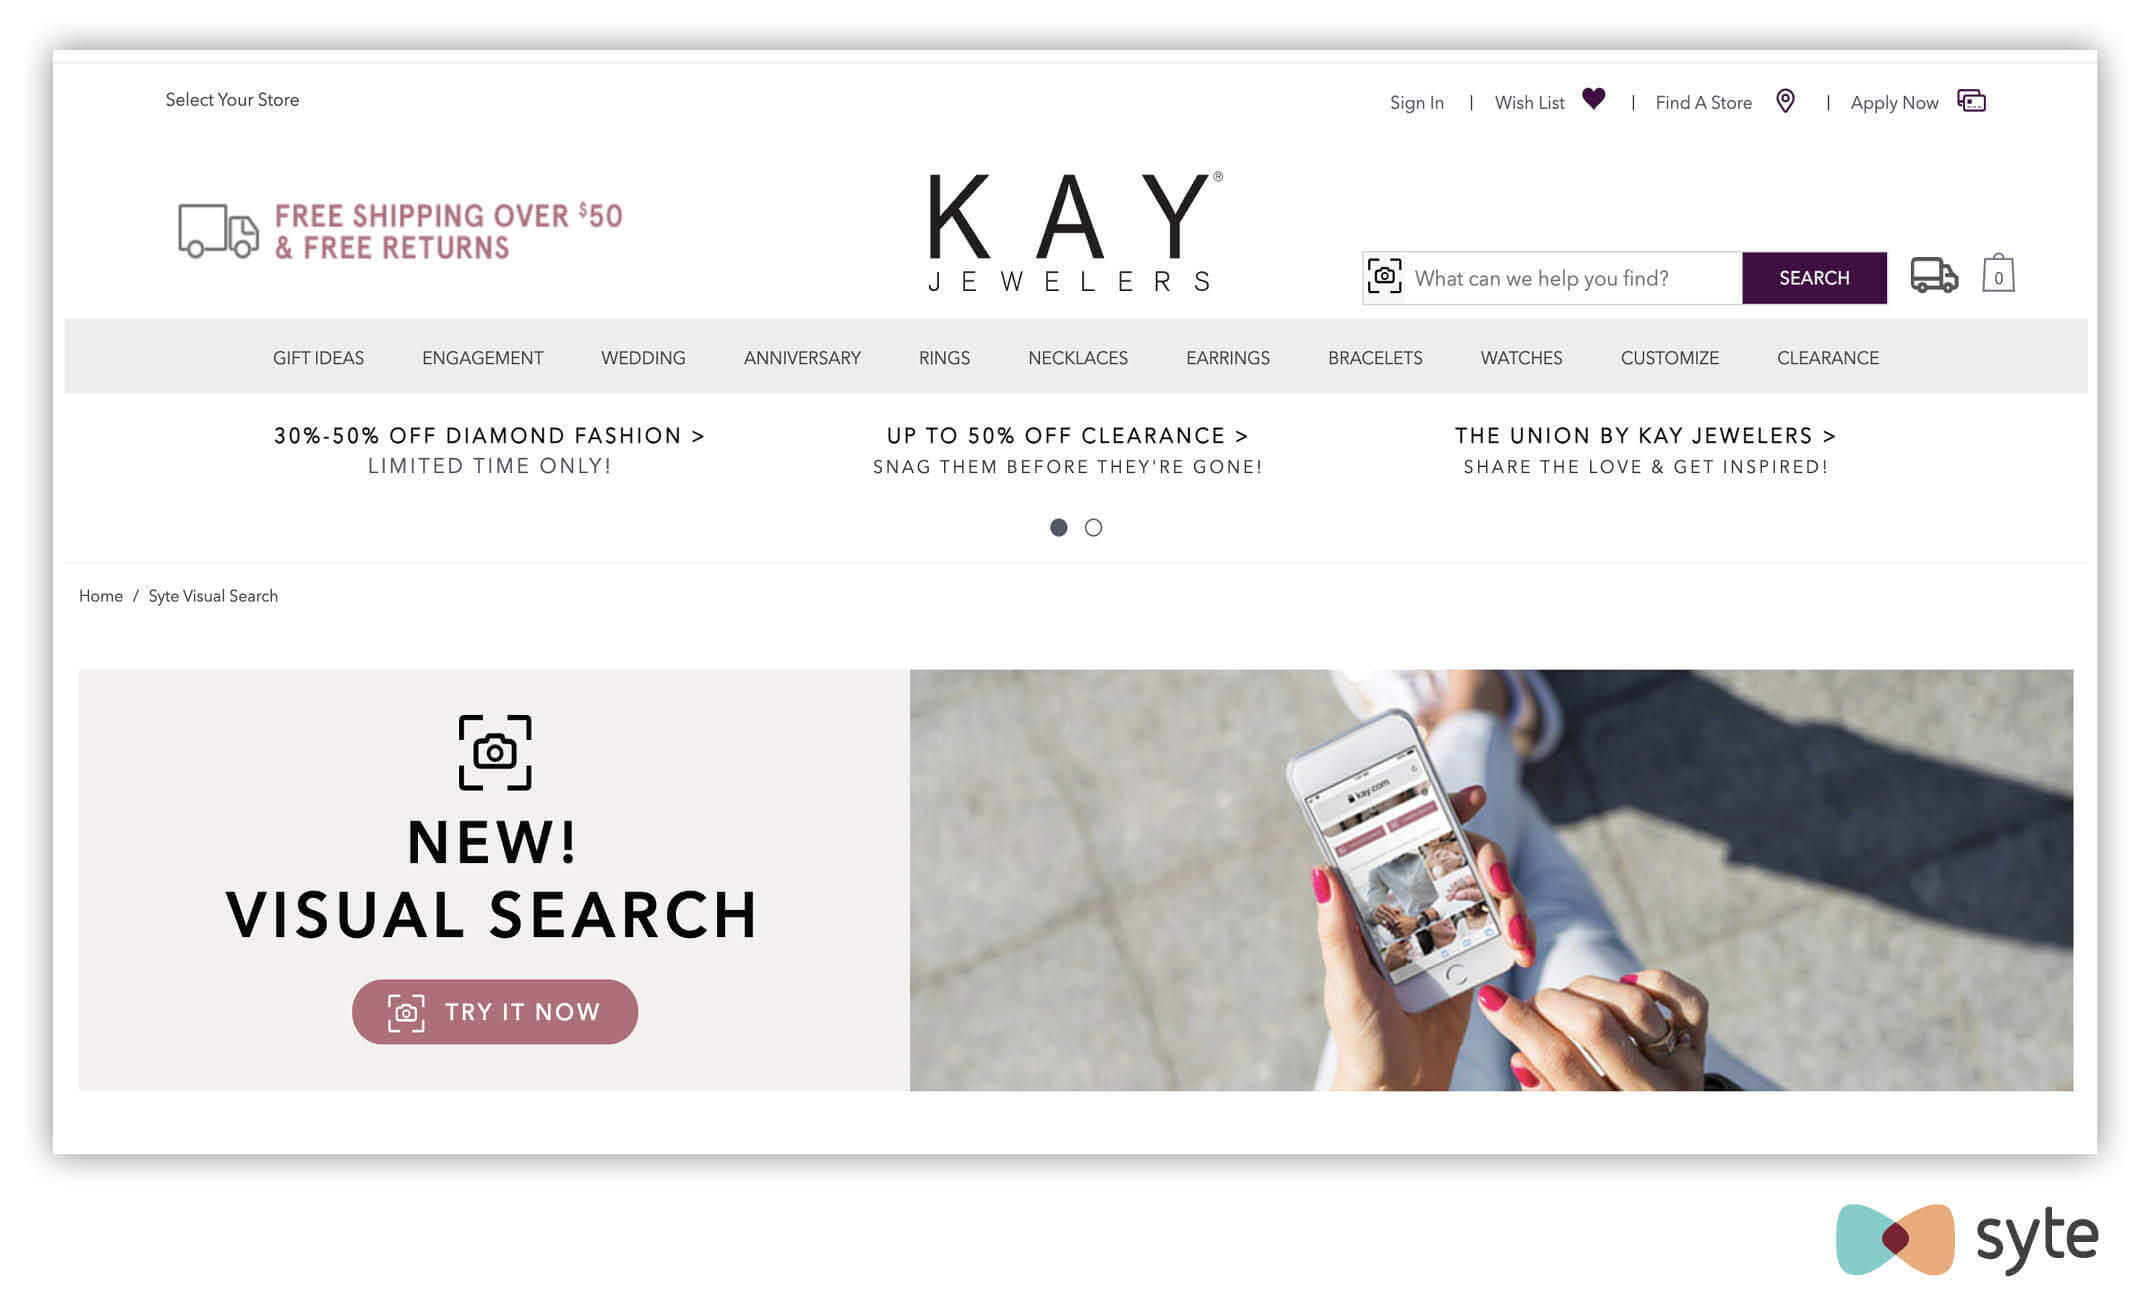 Kay's visual search page is an example of Discovery Design for jewelry